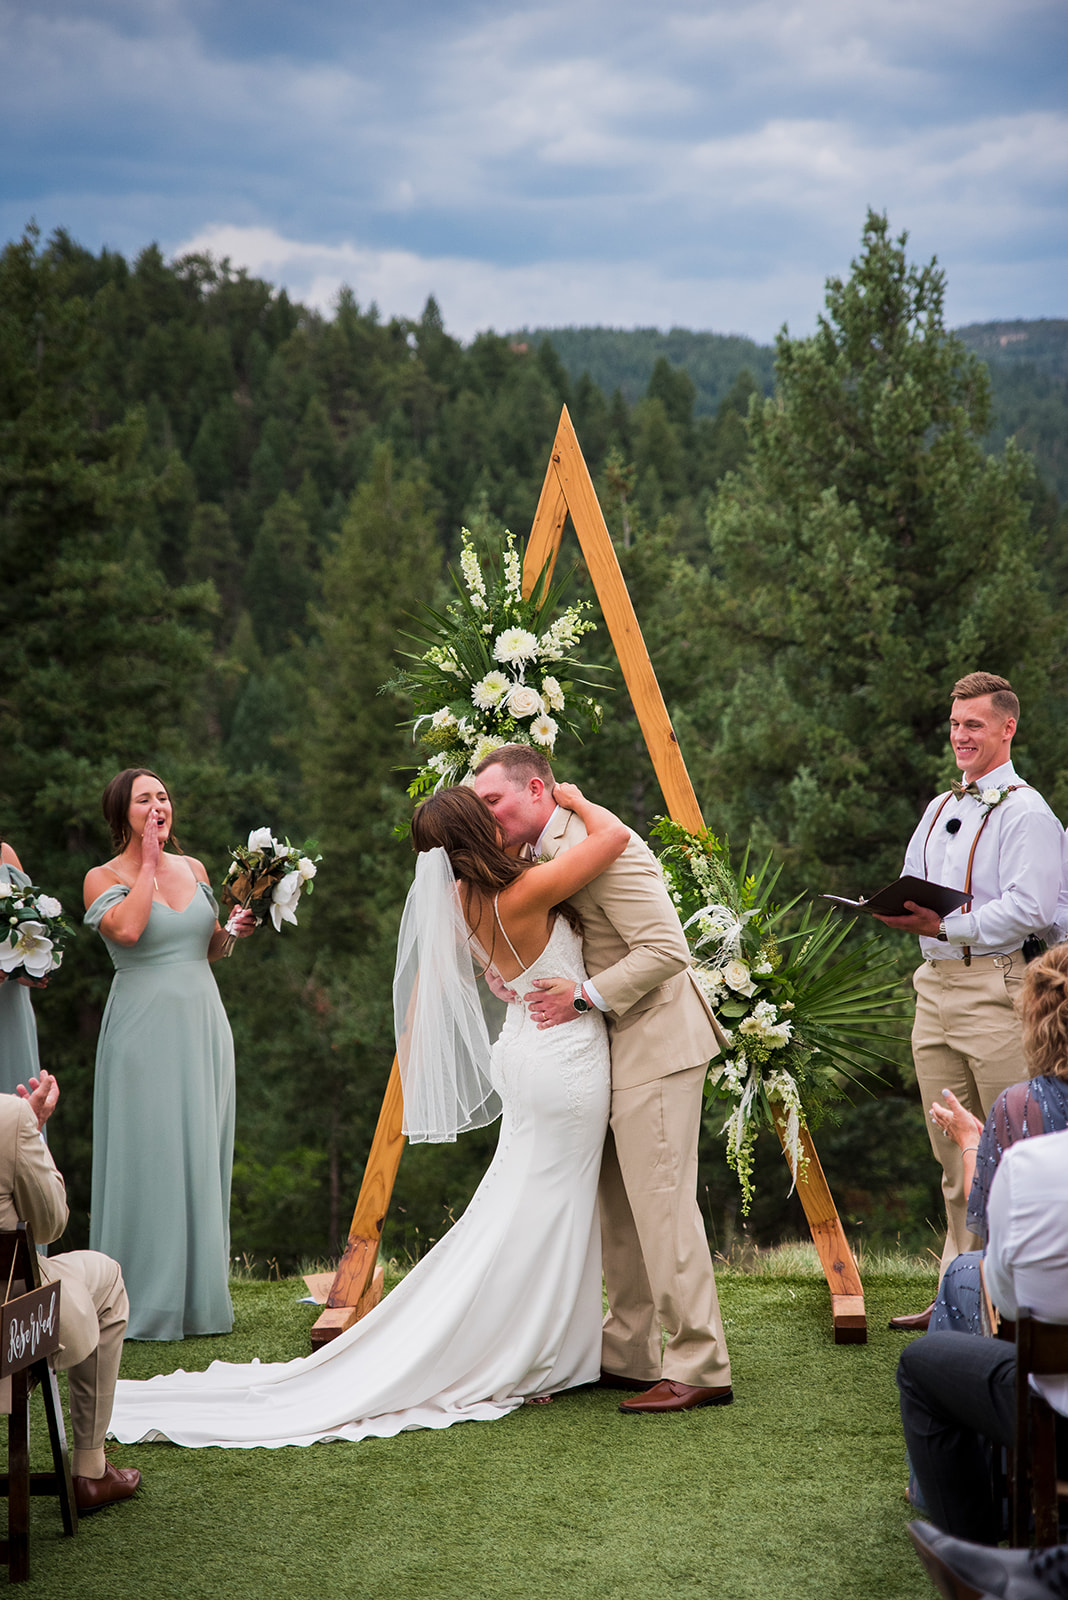 Bride and groom share their first kiss after the ceremony under a pointed wooden arch.